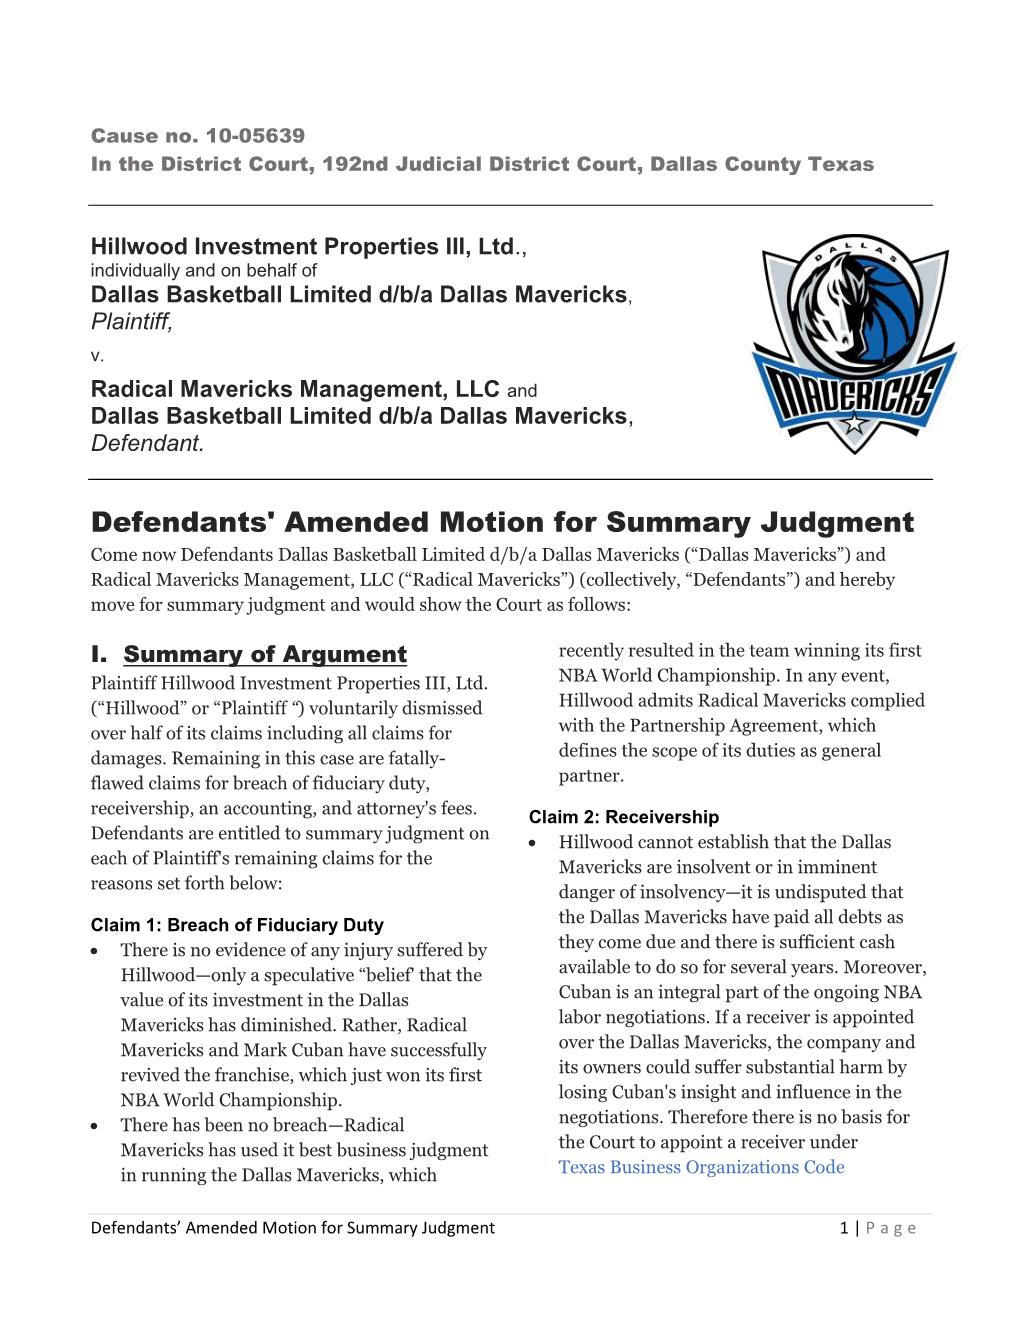 Defendants' Amended Motion for Summary Judgment